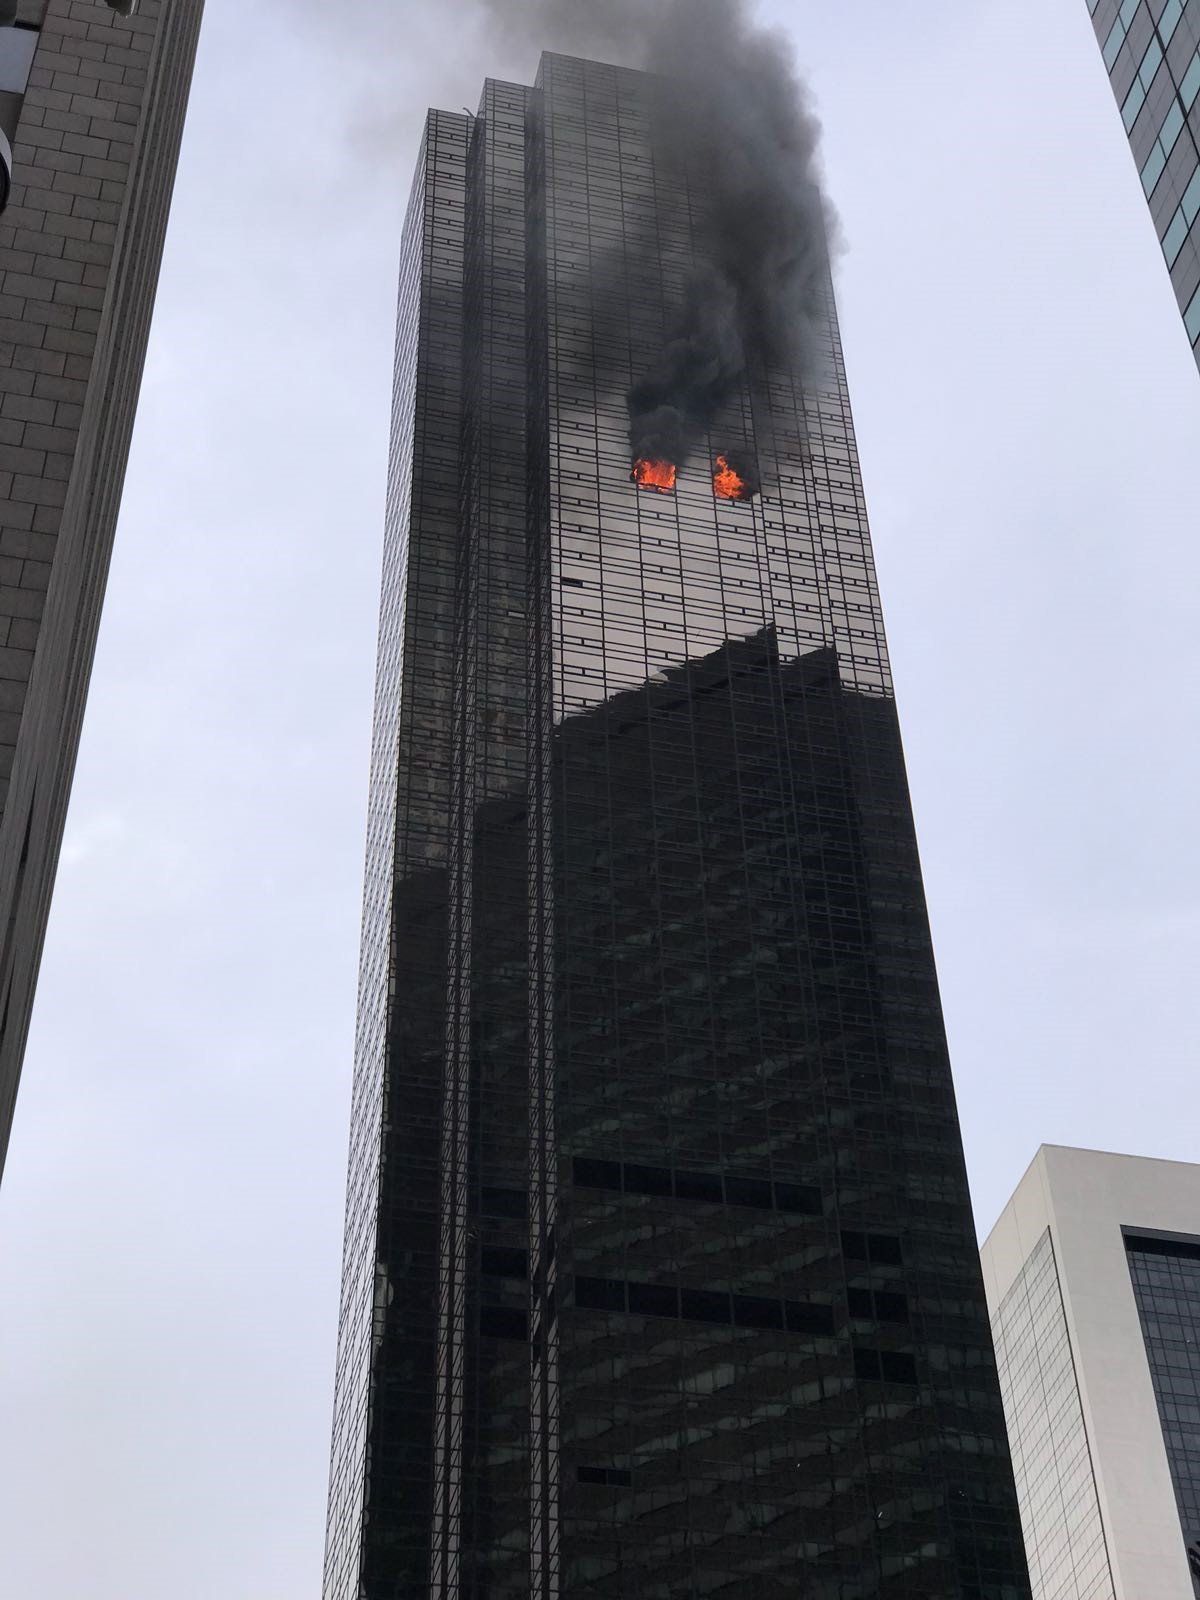 Smoke rises from the 50th floor of Trump Tower in Manhattan on April 7.